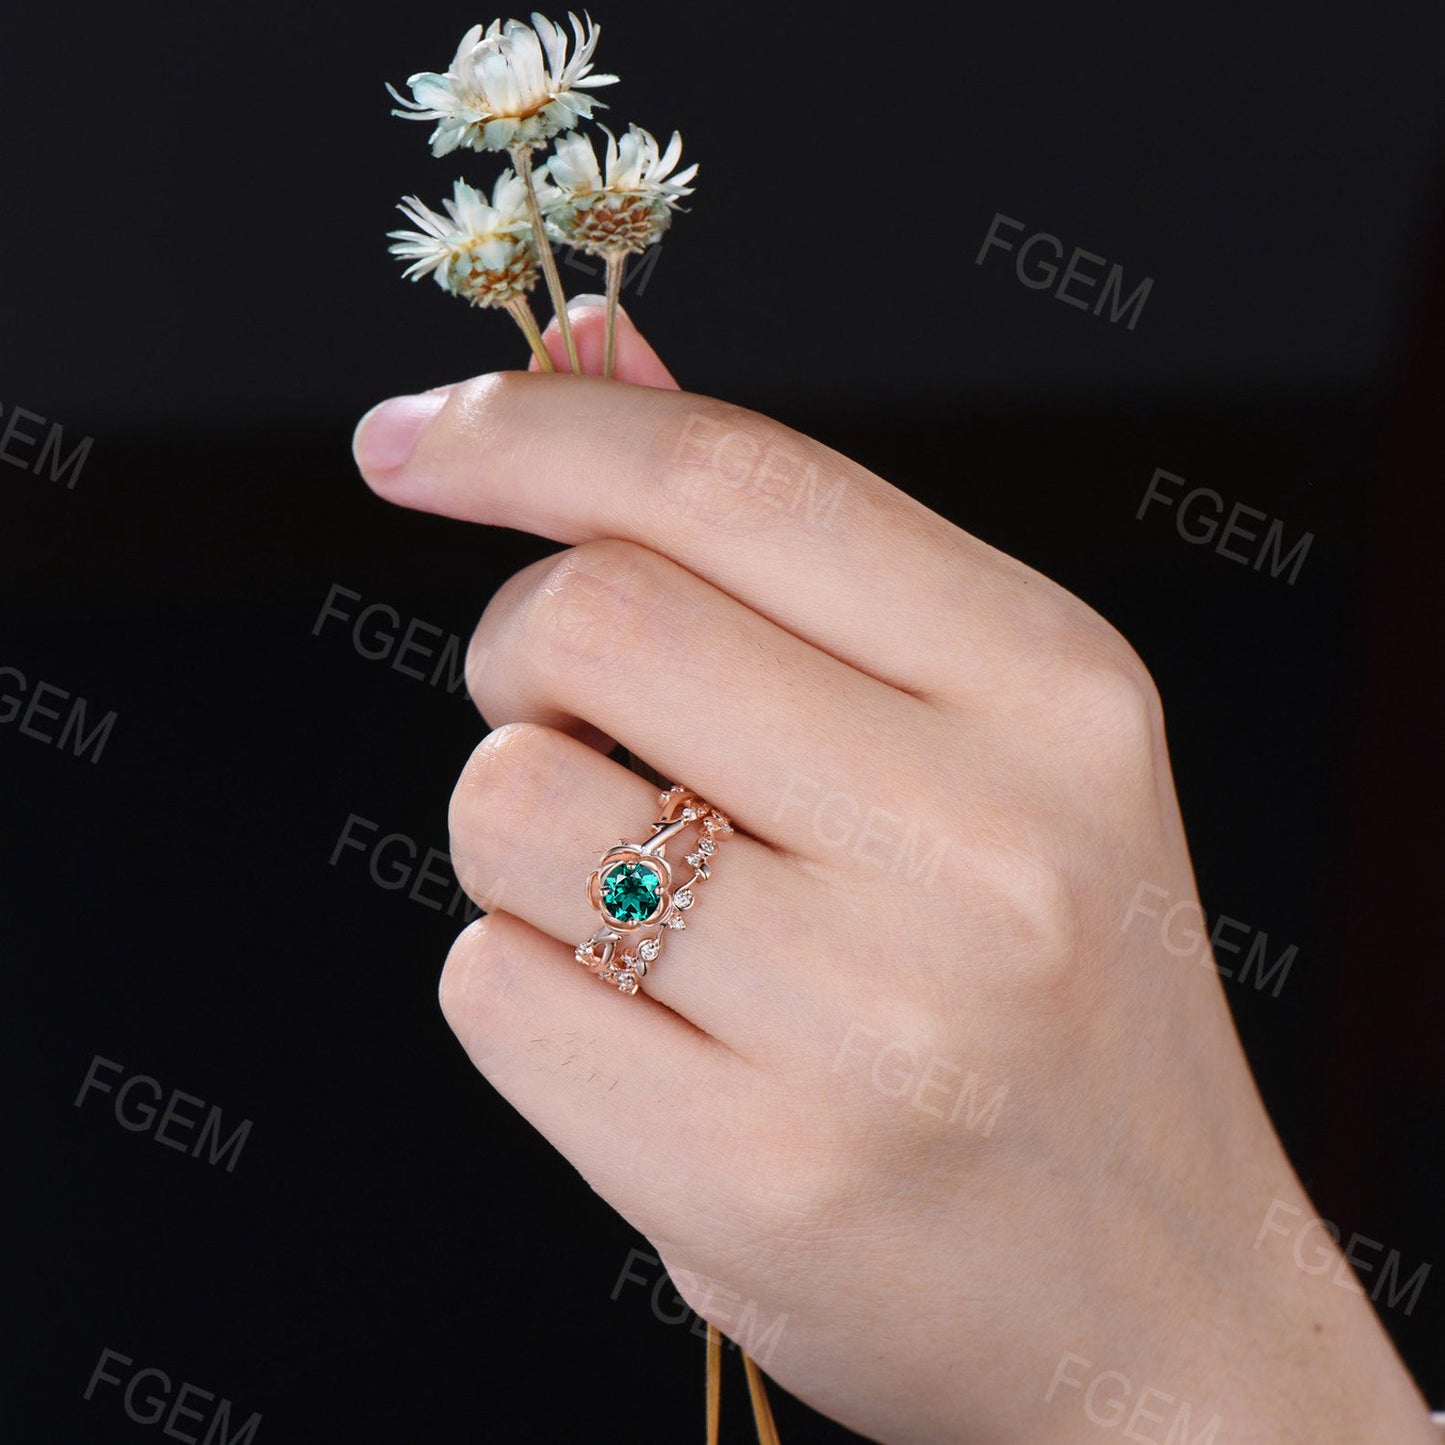 Rose Flower Green Emerald Engagement Ring Set Round Emerald Diamond Wedding Ring Nature Inspired Floral Ring Leaf Emerald Ring Promise Gifts for Women